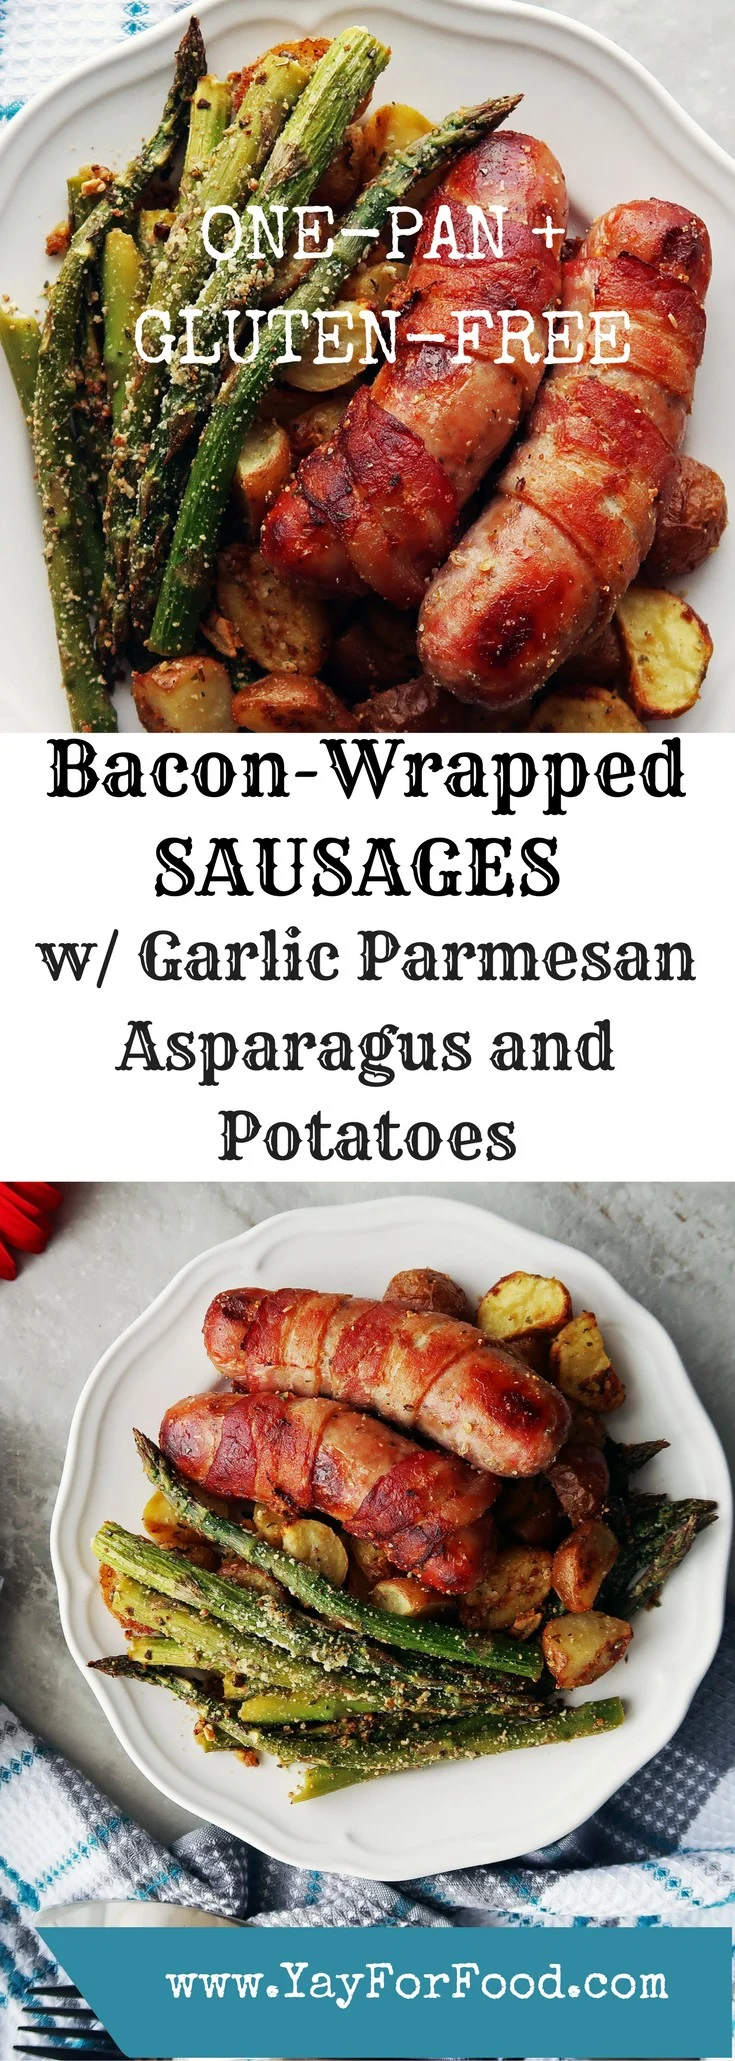 Bacon-Wrapped Sausages with Garlic Parmesan Asparagus and Potatoes ...